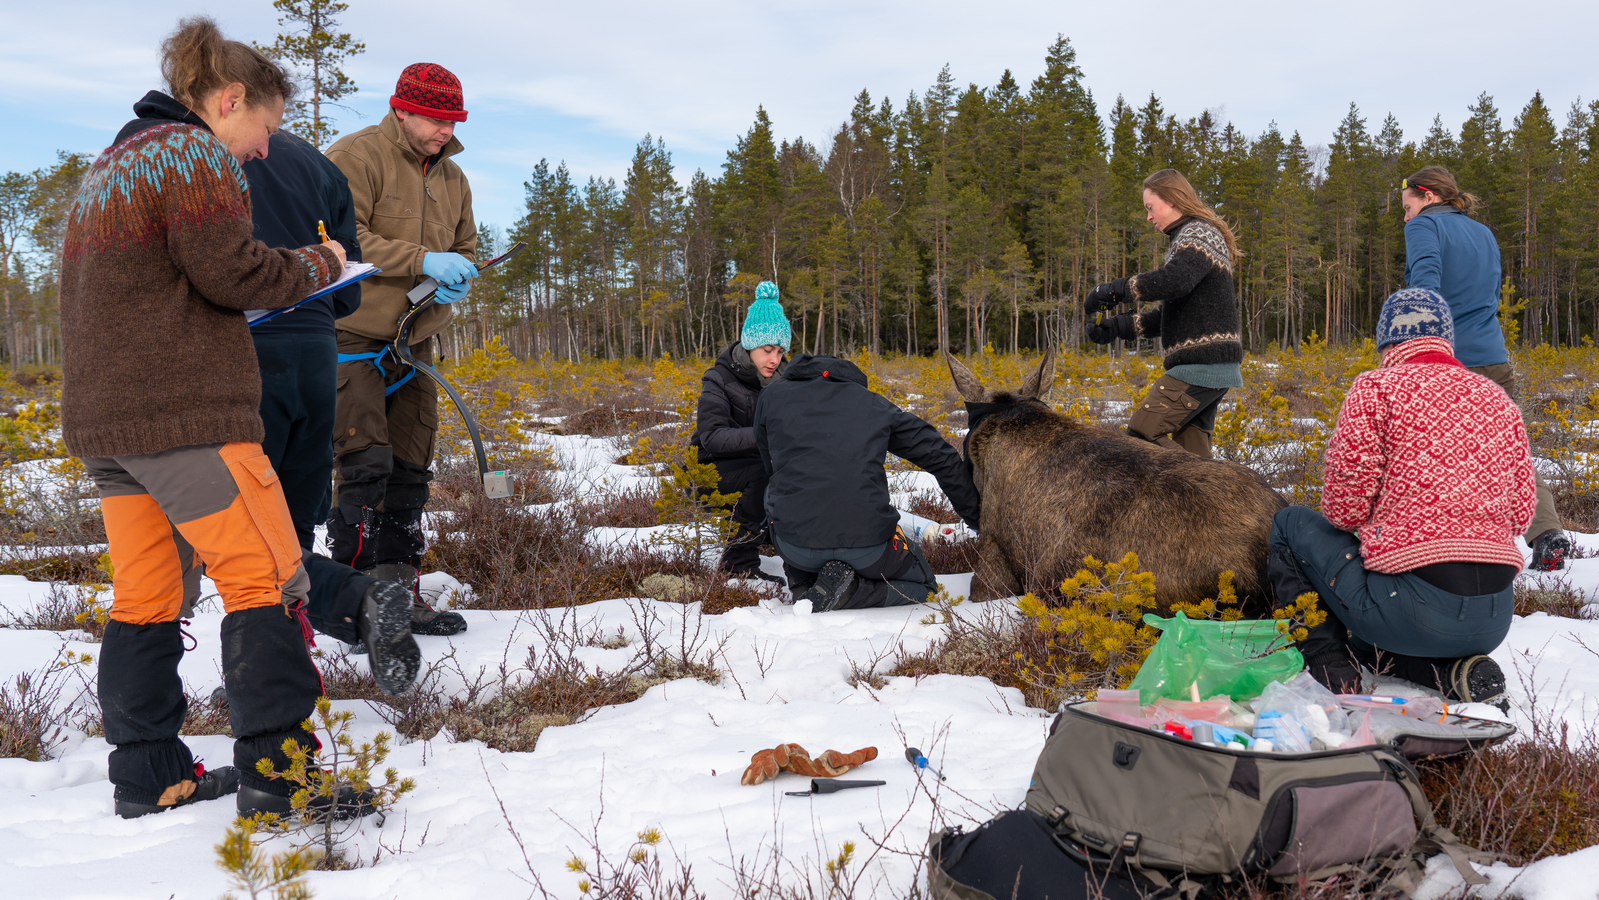 Researchers and students dressed for the outdoors are out in the forest and spot a moose. The moose lies on the ground with several people around it. Someone is standing next to it and writing notes. They are in an open area and the forest is visible in the background, a little snow on the ground but green fir trees.